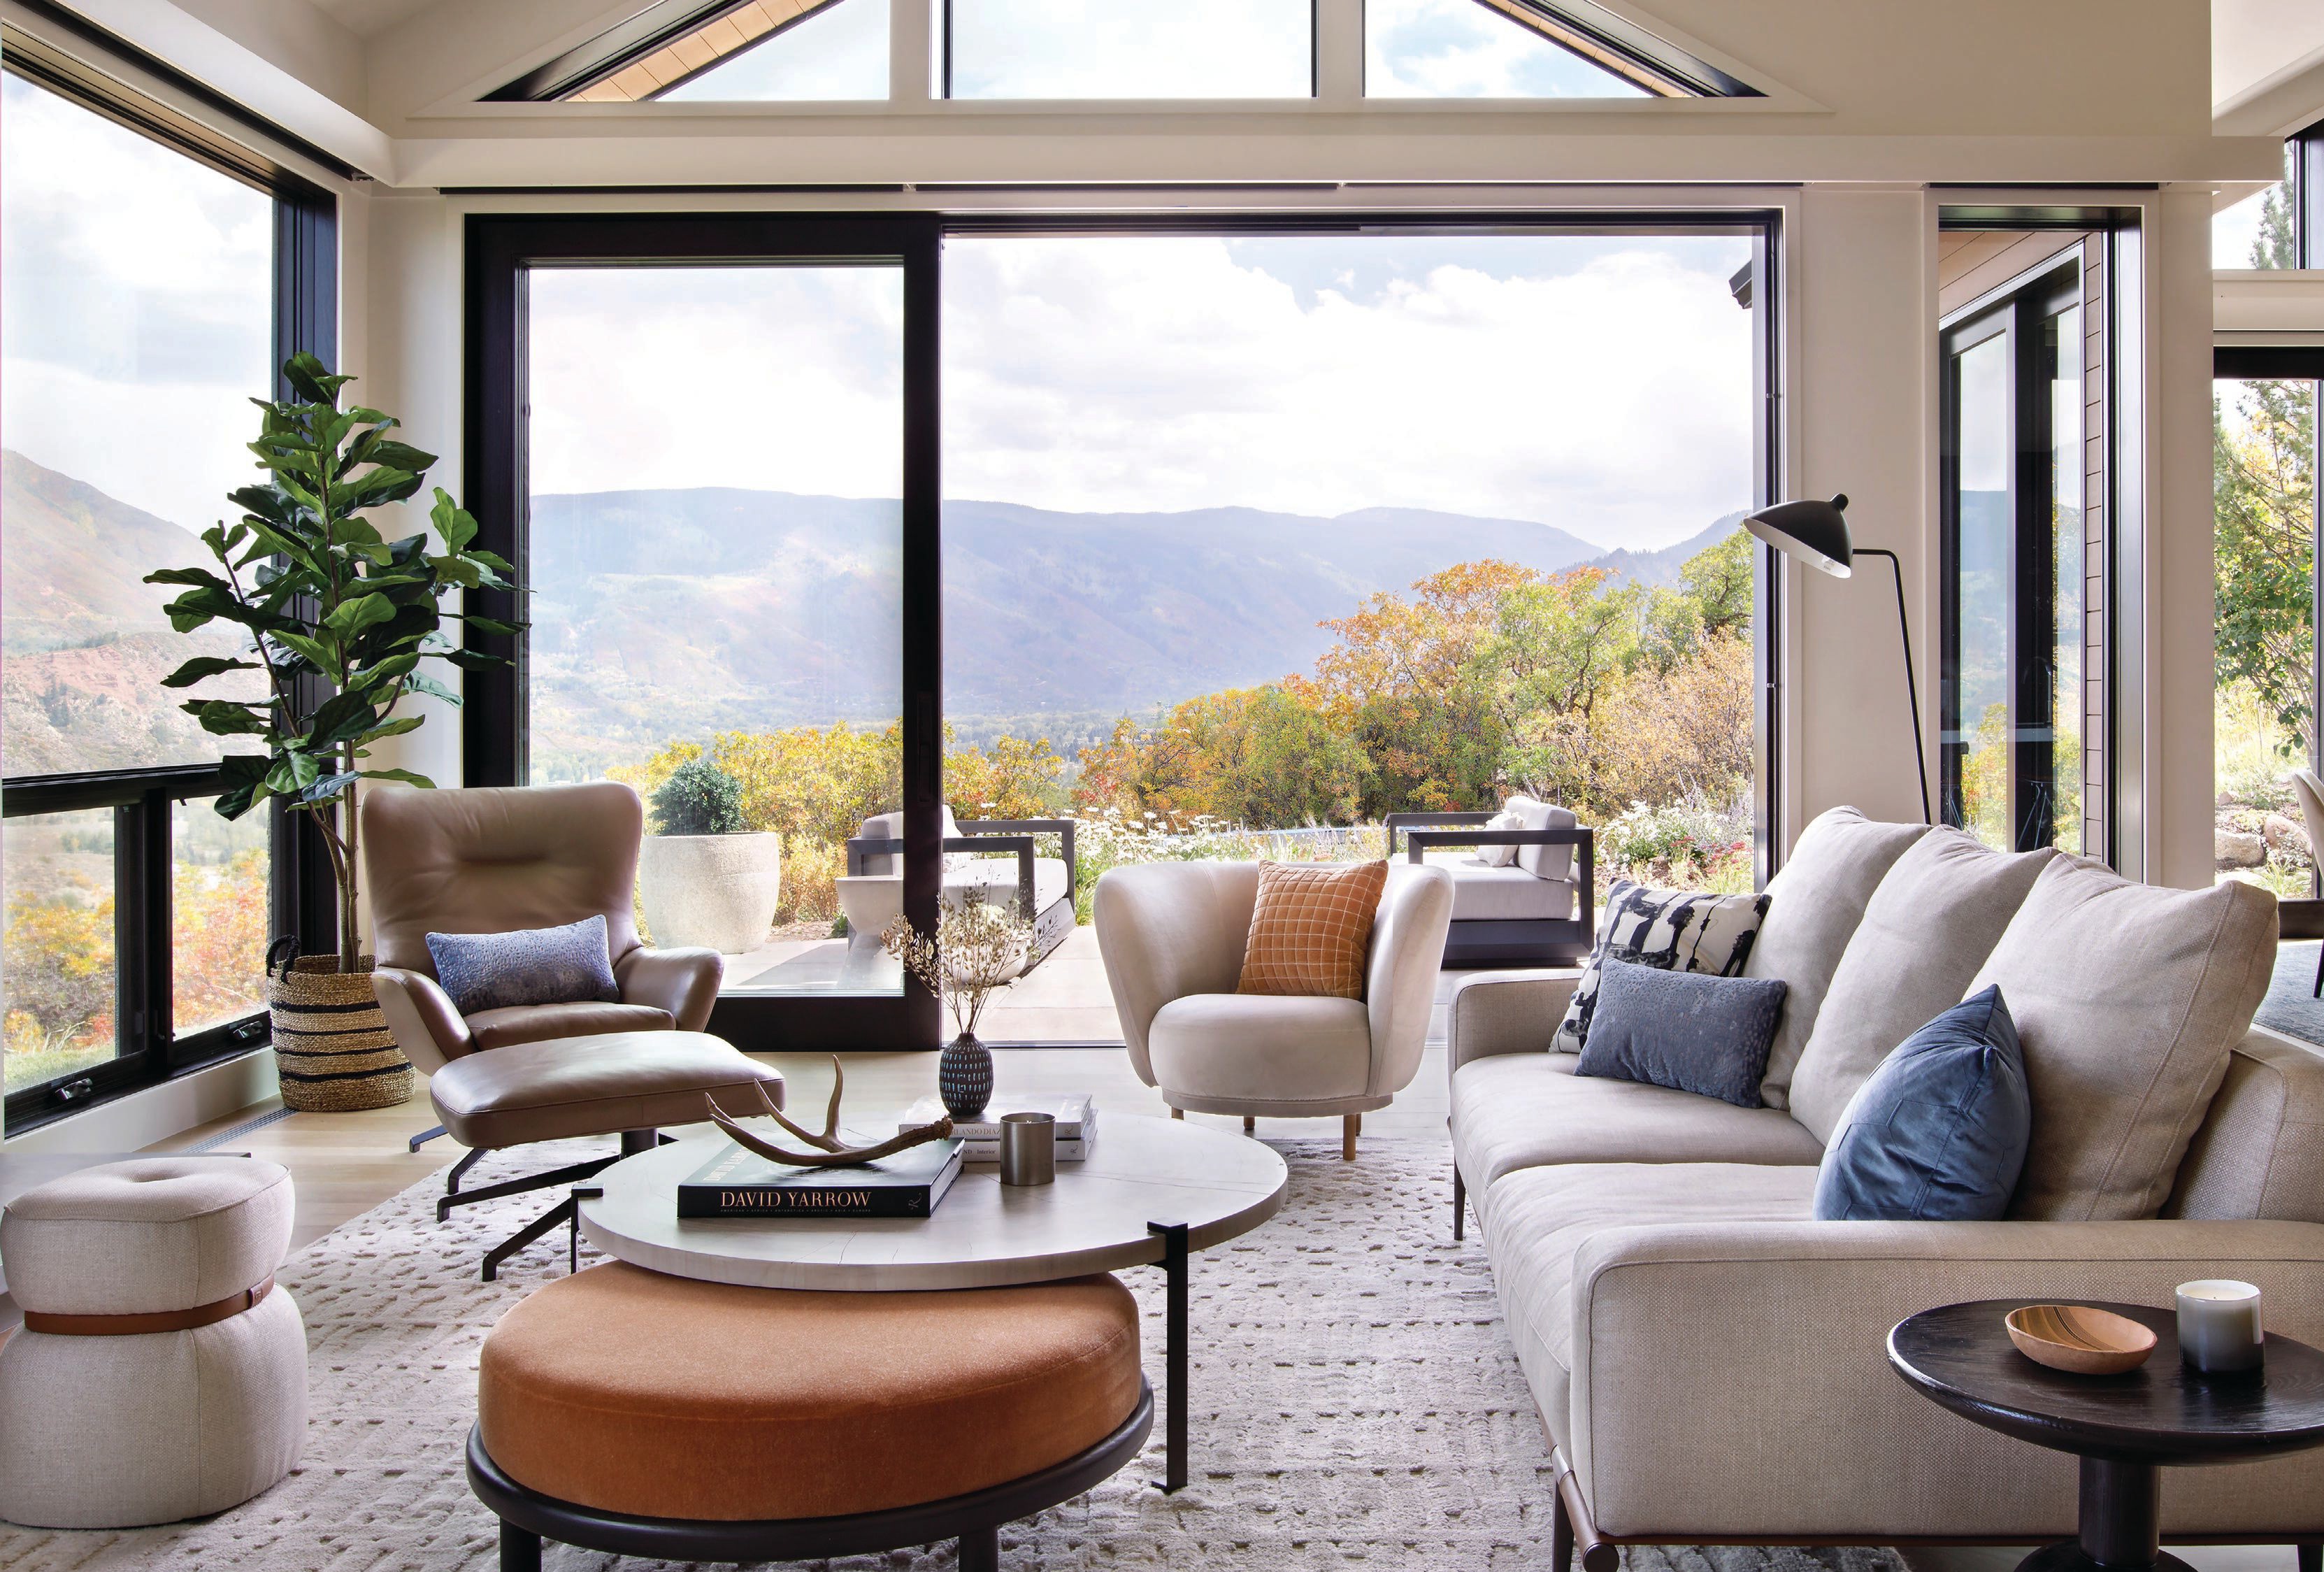 Joe McGuire Design maximized the views in this West Buttermilk home. JOE MCGUIRE DESIGN PHOTO COURTESY OF GIBEON PHOTOGRAPHY